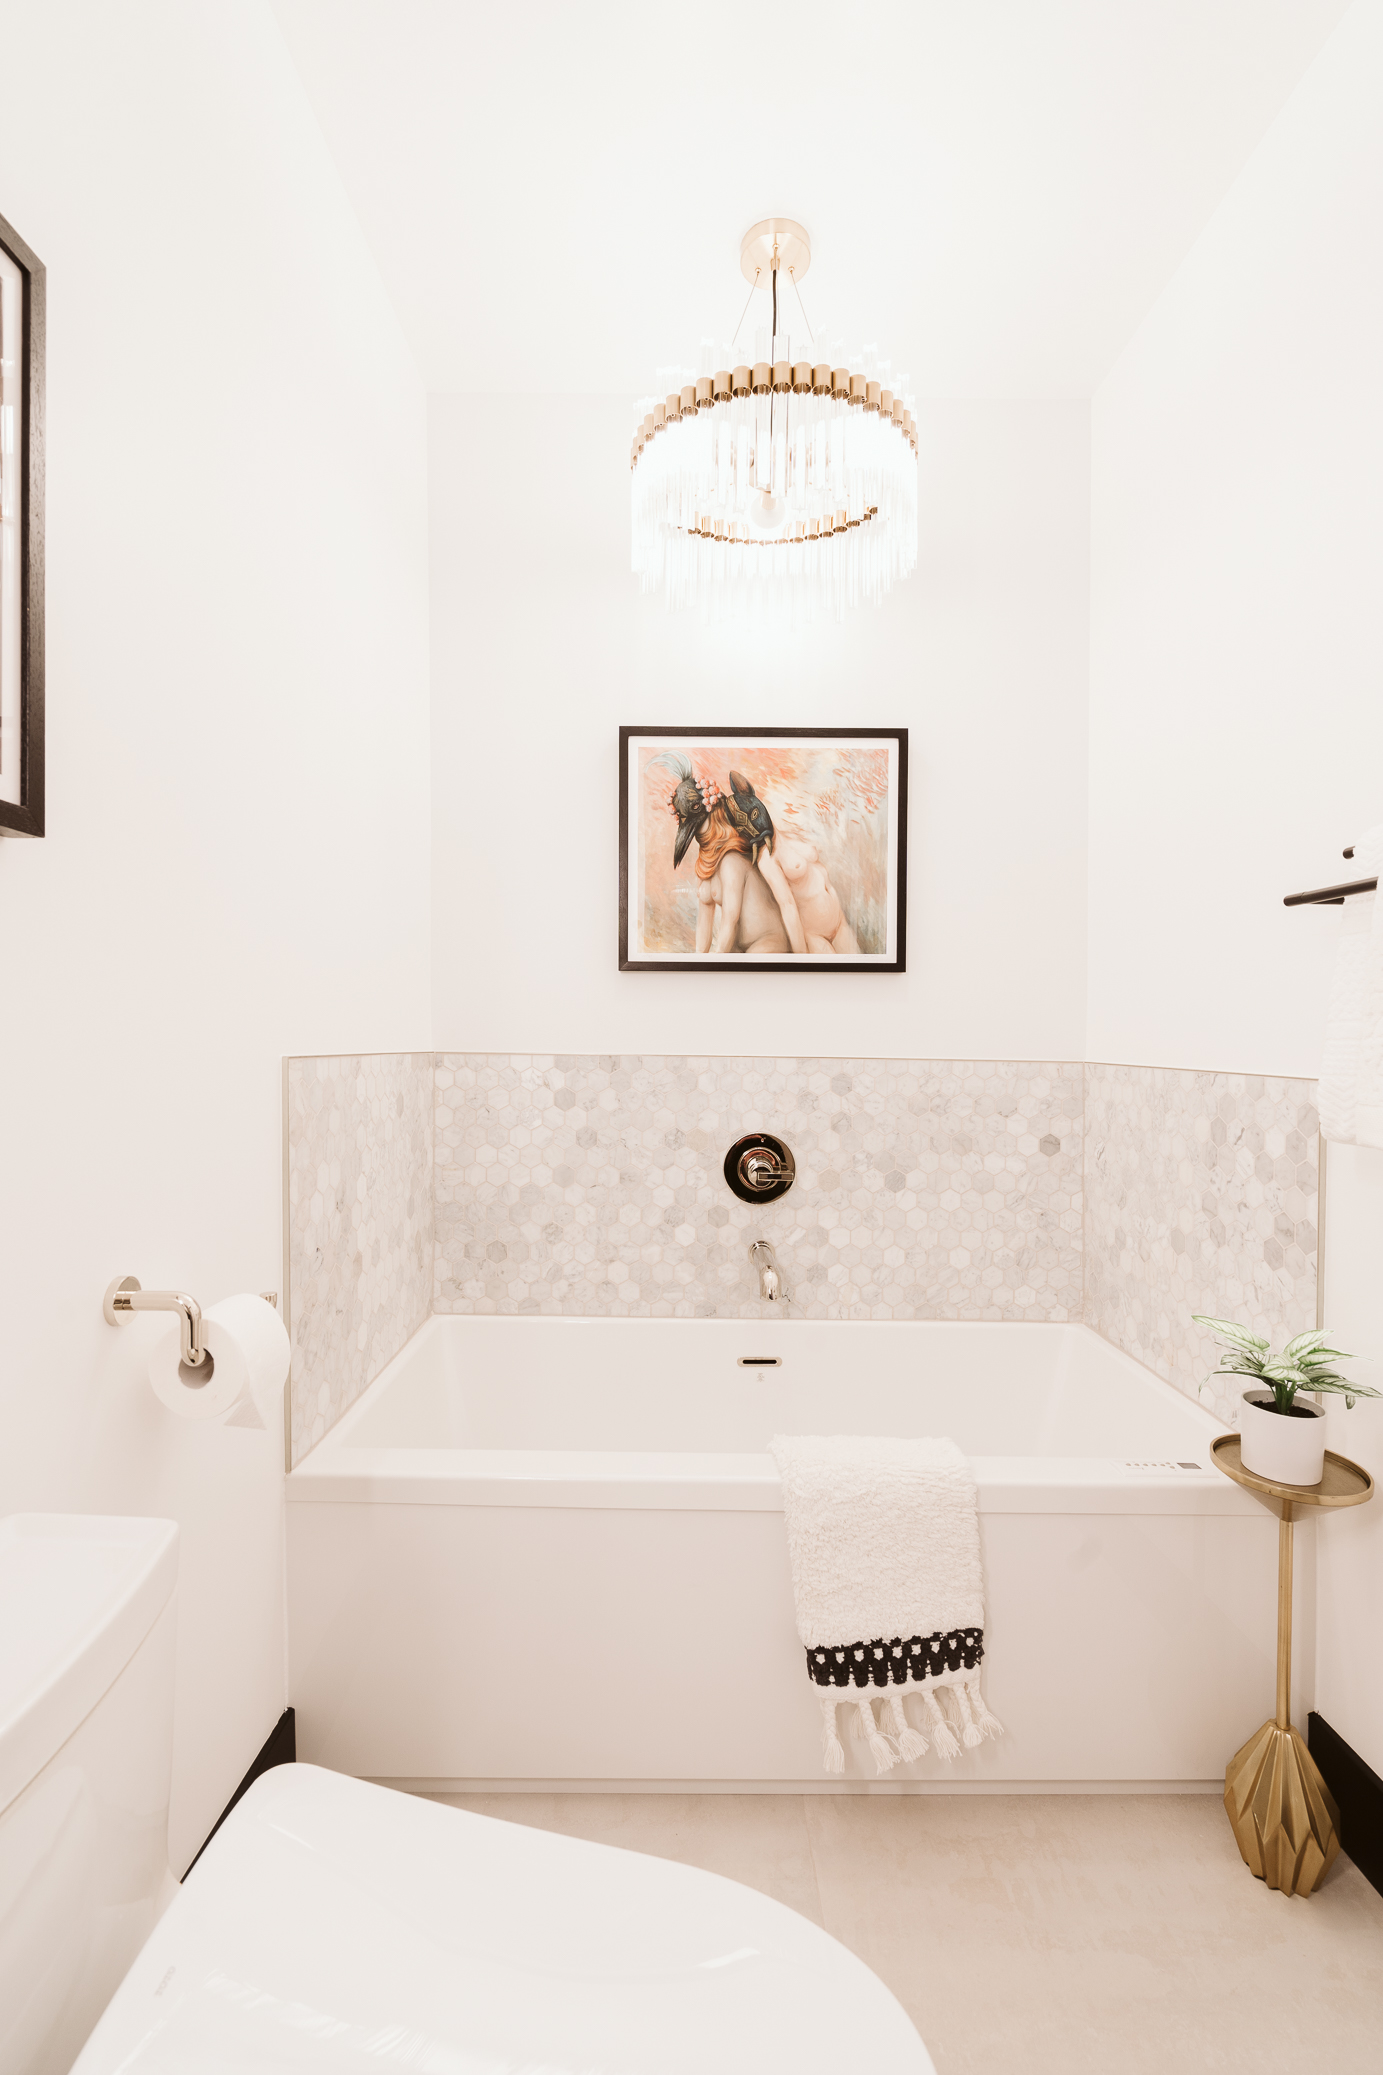 8 TIPS FOR THE PERFECT BATHROOM DECOR image 1